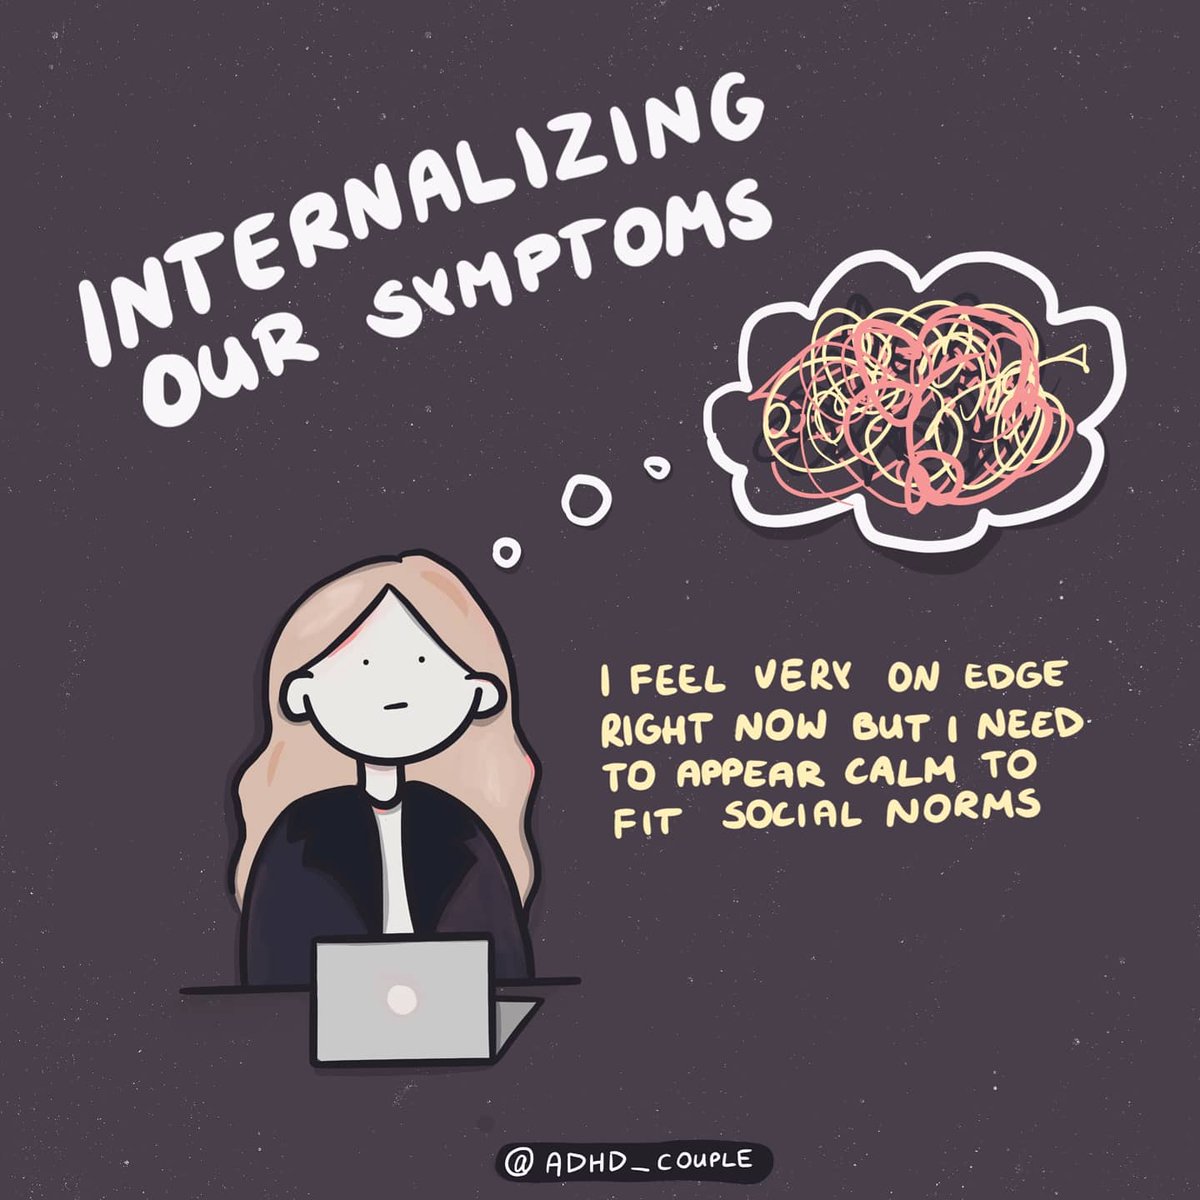 Usually hiding & internalizing our symptoms.